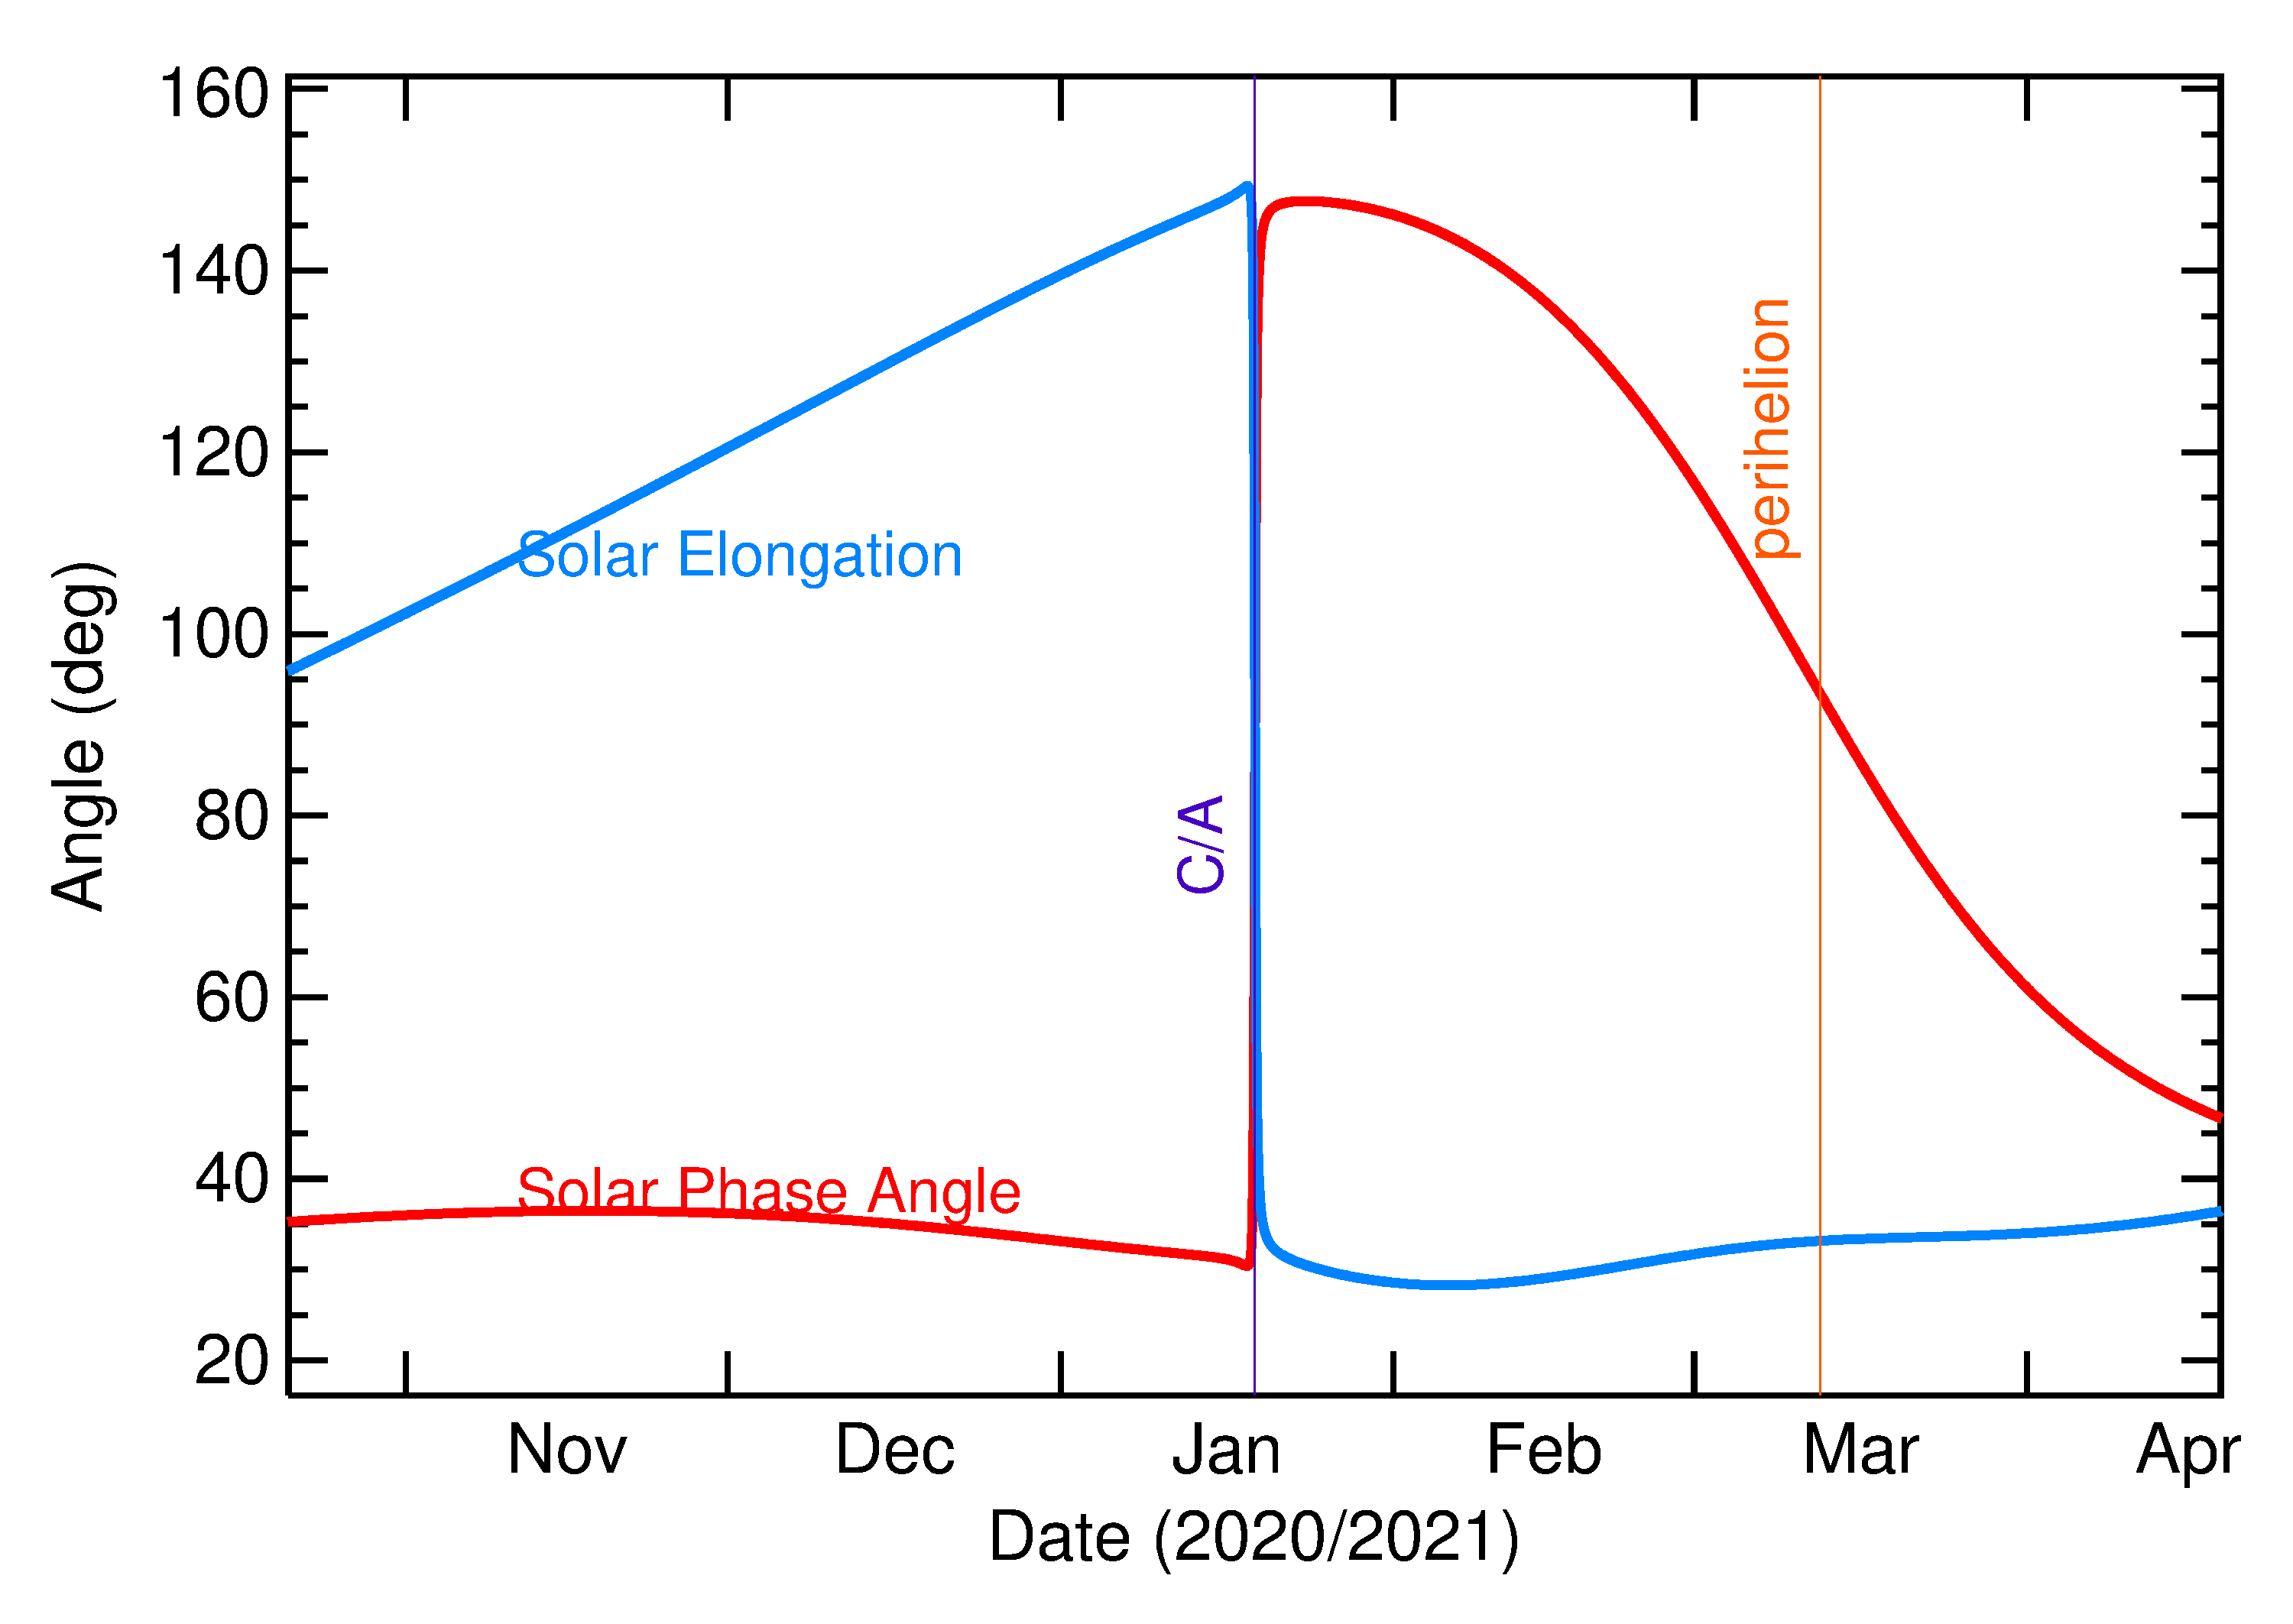 Solar Elongation and Solar Phase Angle of 2021 BV1 in the months around closest approach